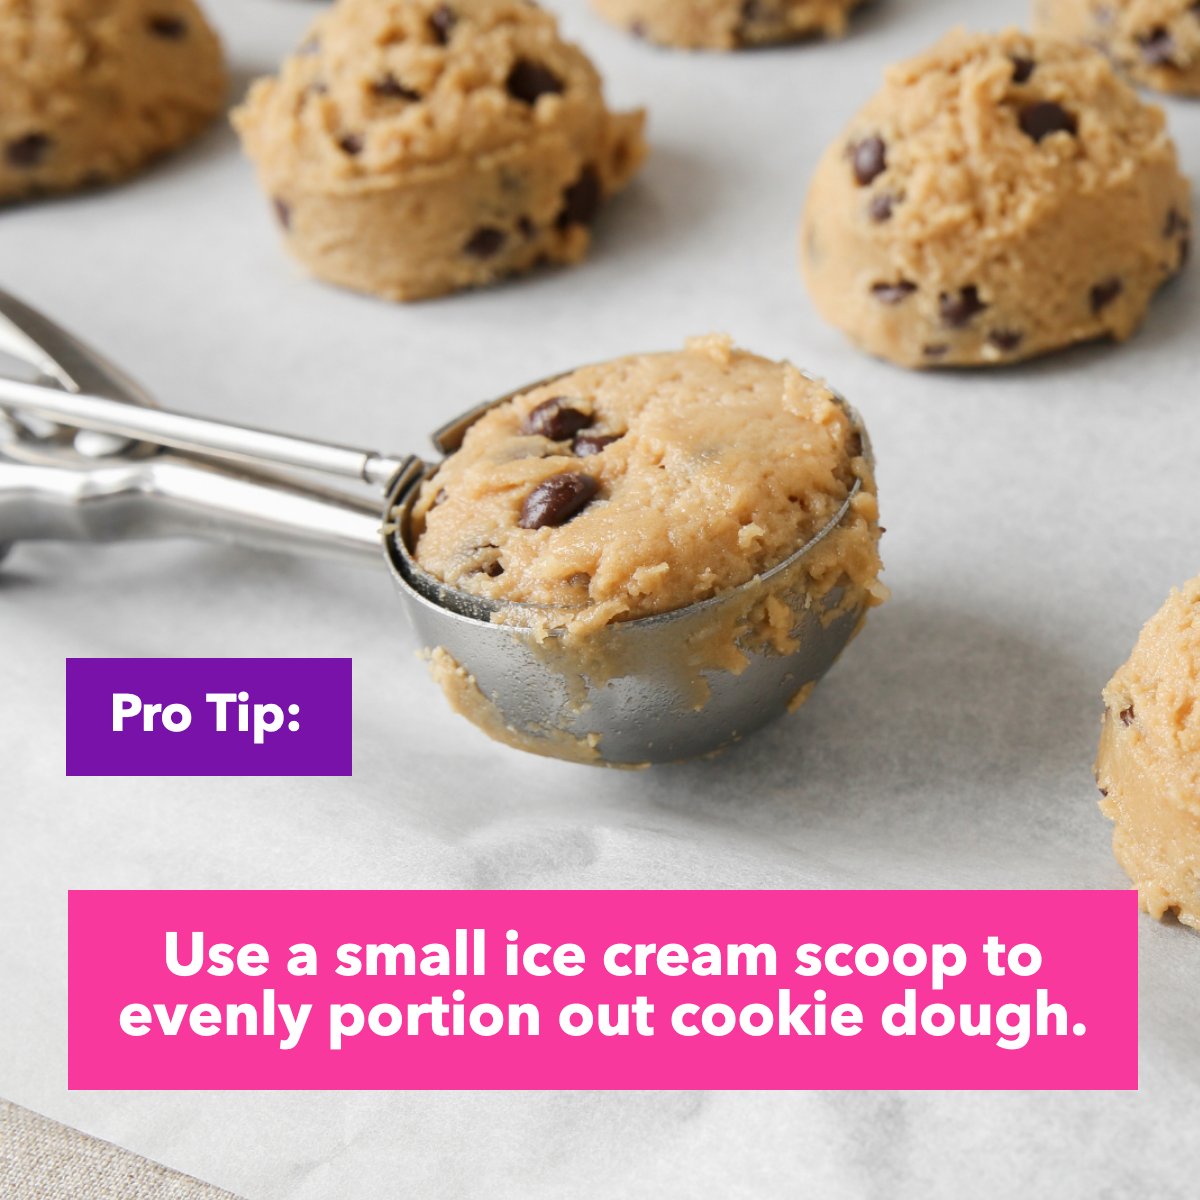 Ready for some baking knowledge 🧁️?

We thought so. Did you know you can use a small ice cream 🍨 scoop to portion out cookie dough like a pro? Now you do!

What's your favorite #bakinghack? Share it below!

#bakingtips #baking #cookies #kitchenhacks #kitchen